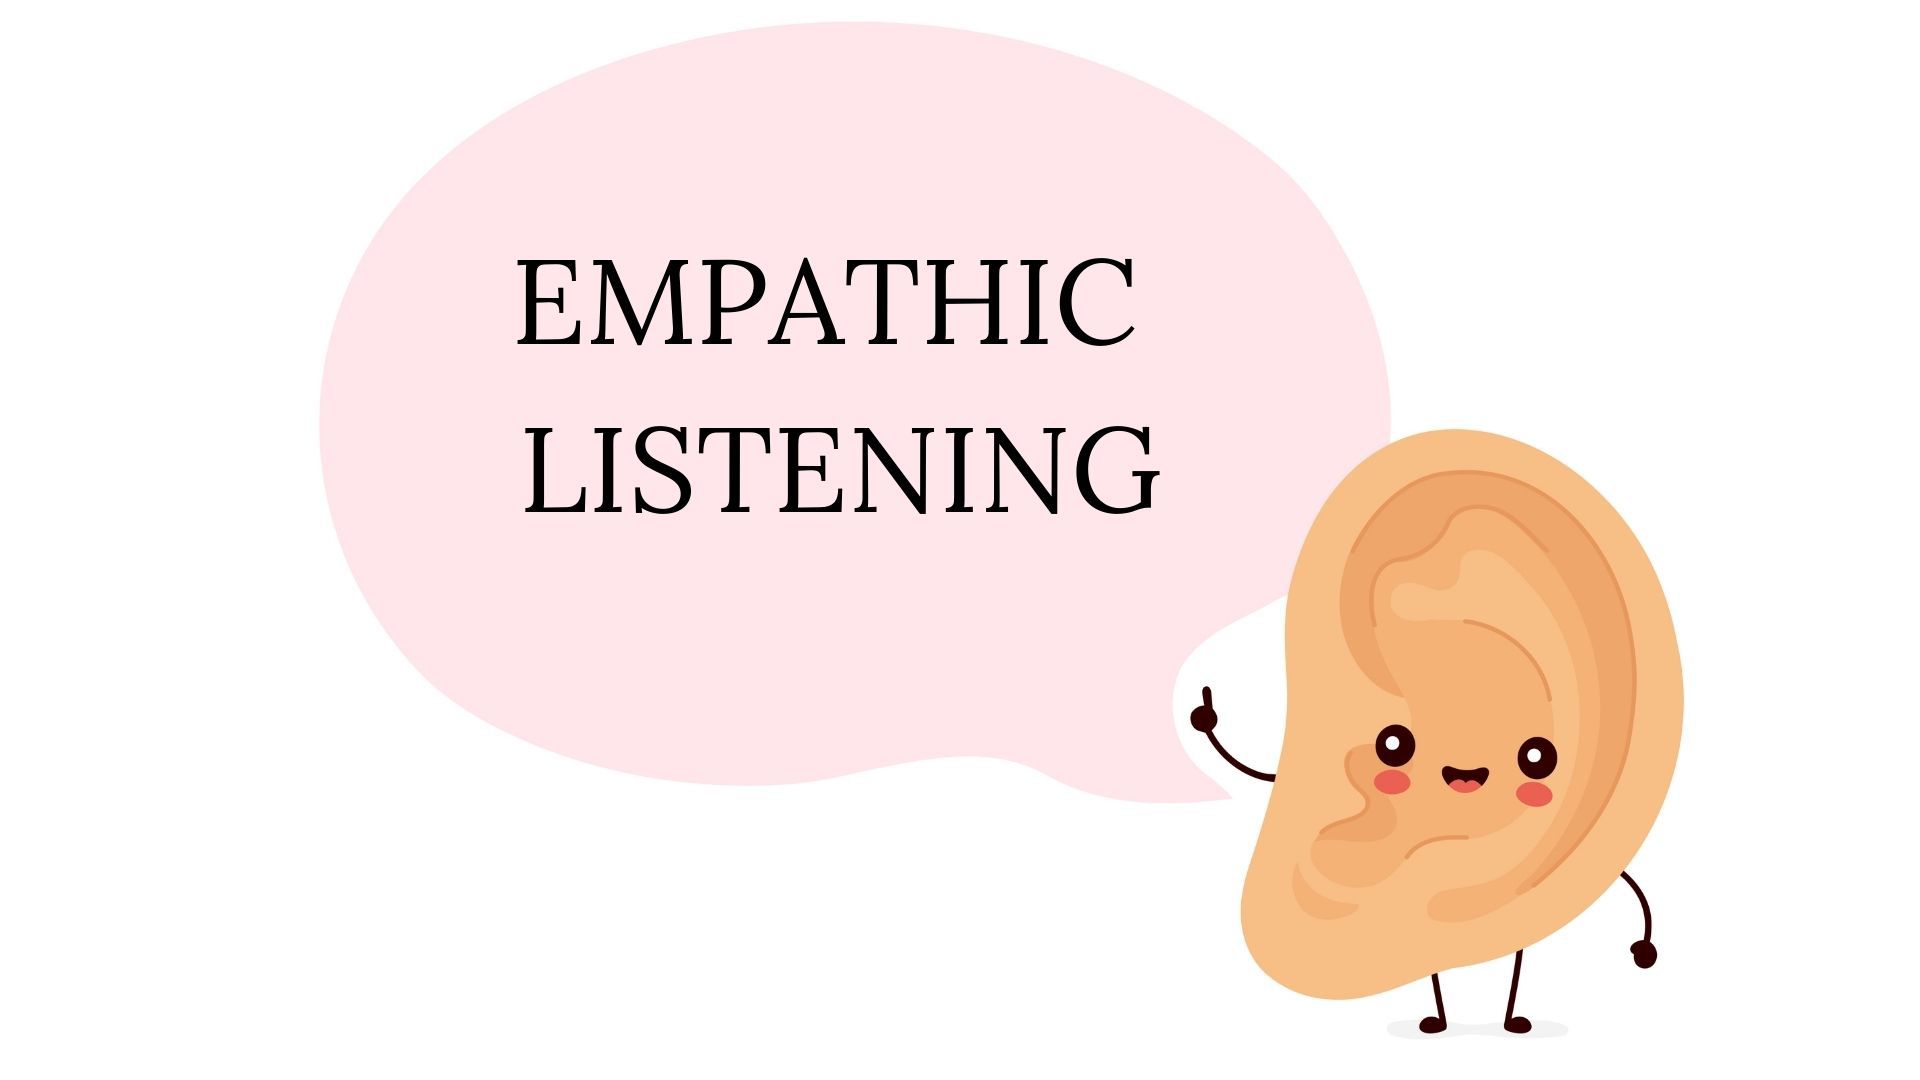 critical thinking is an essential component of empathic listening